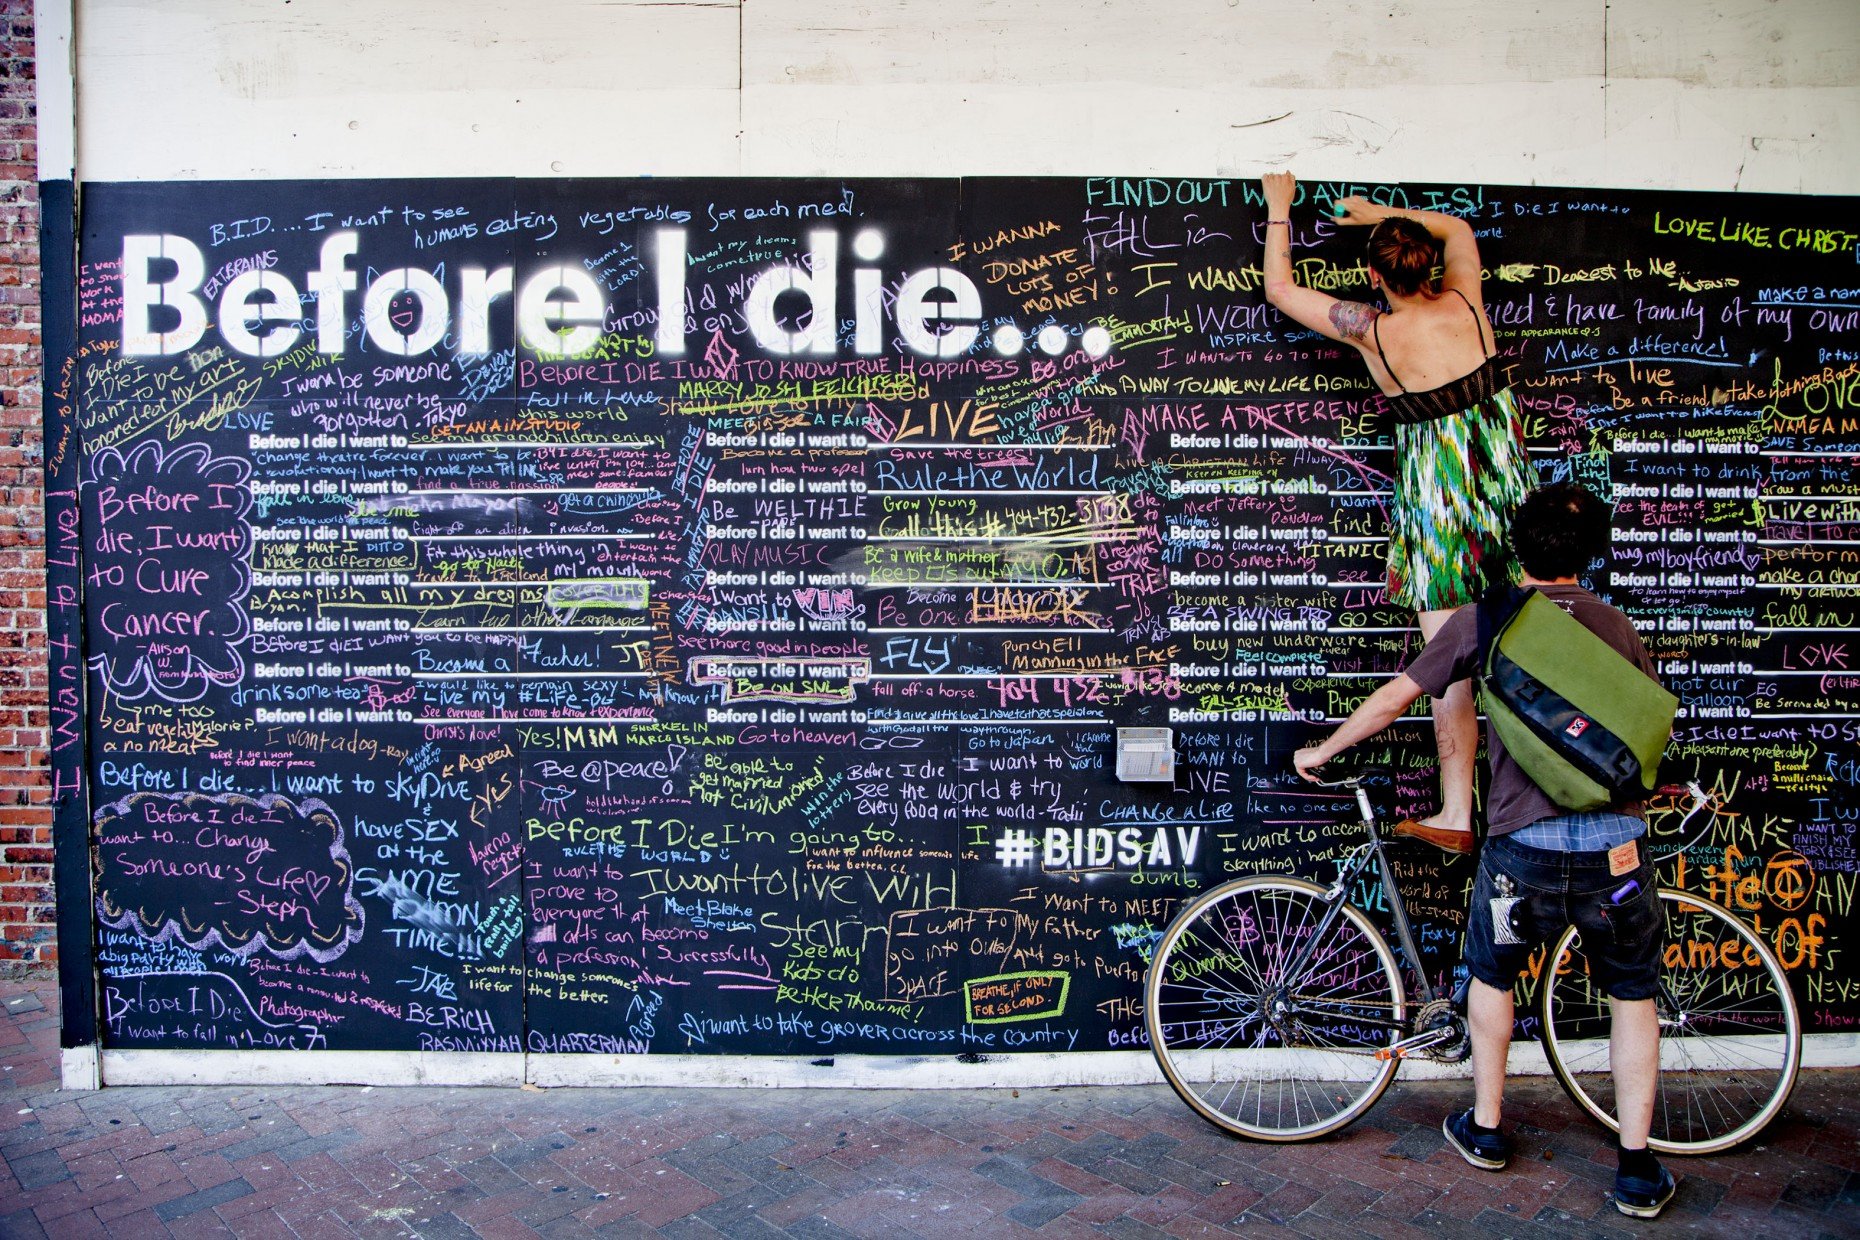 The Before I Die wall has become an international art project, bringing people together to think about their dreams.